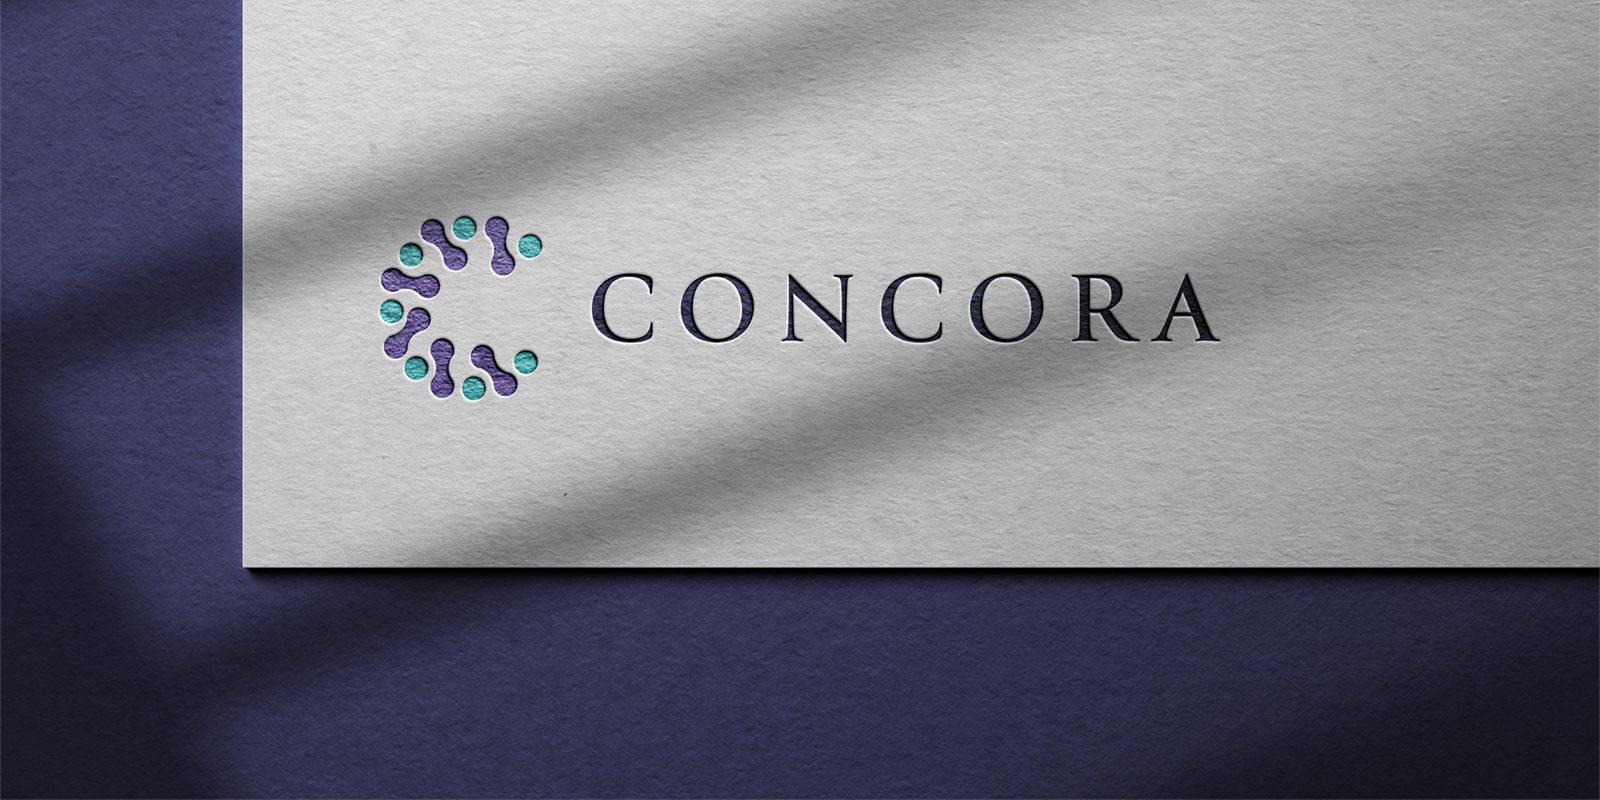 Concora Branding logo printed on textured paper with soft light